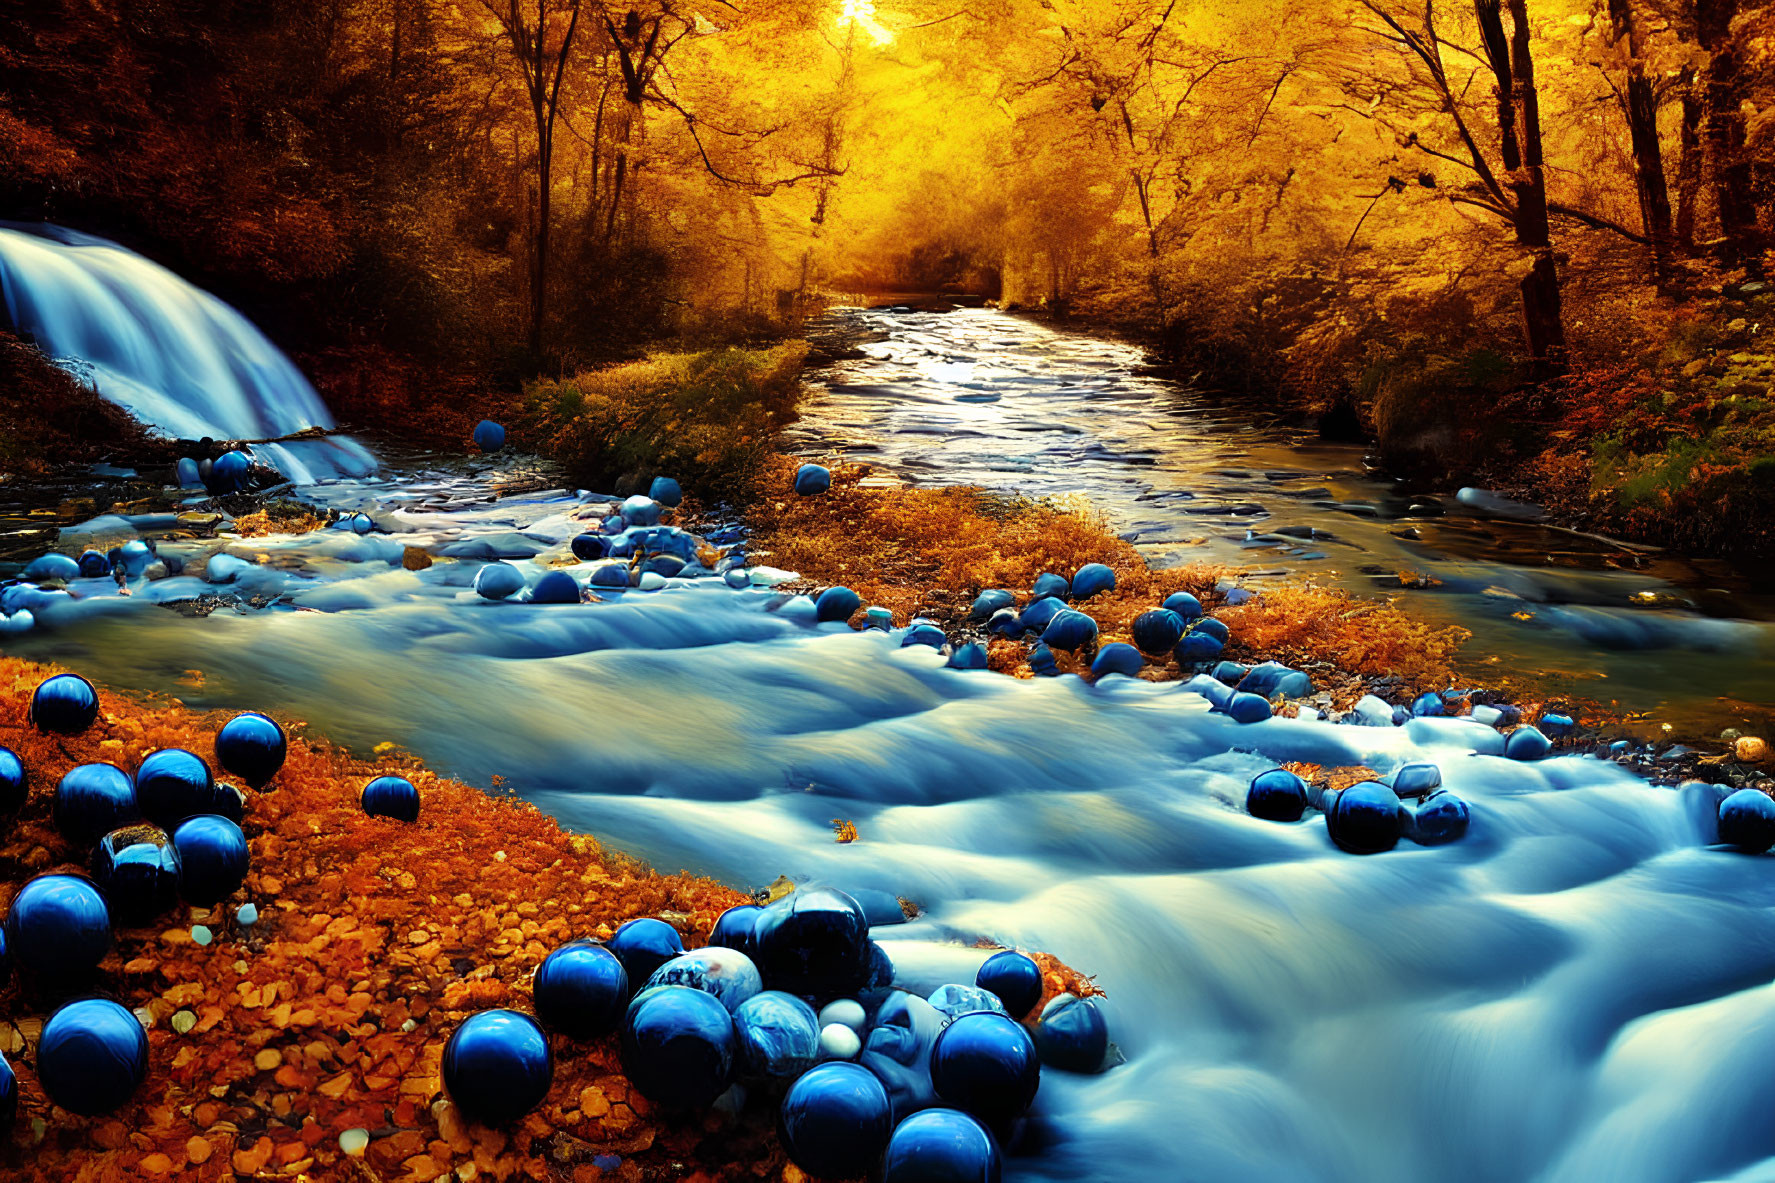 Tranquil autumn stream with waterfall, golden trees, and blue spheres